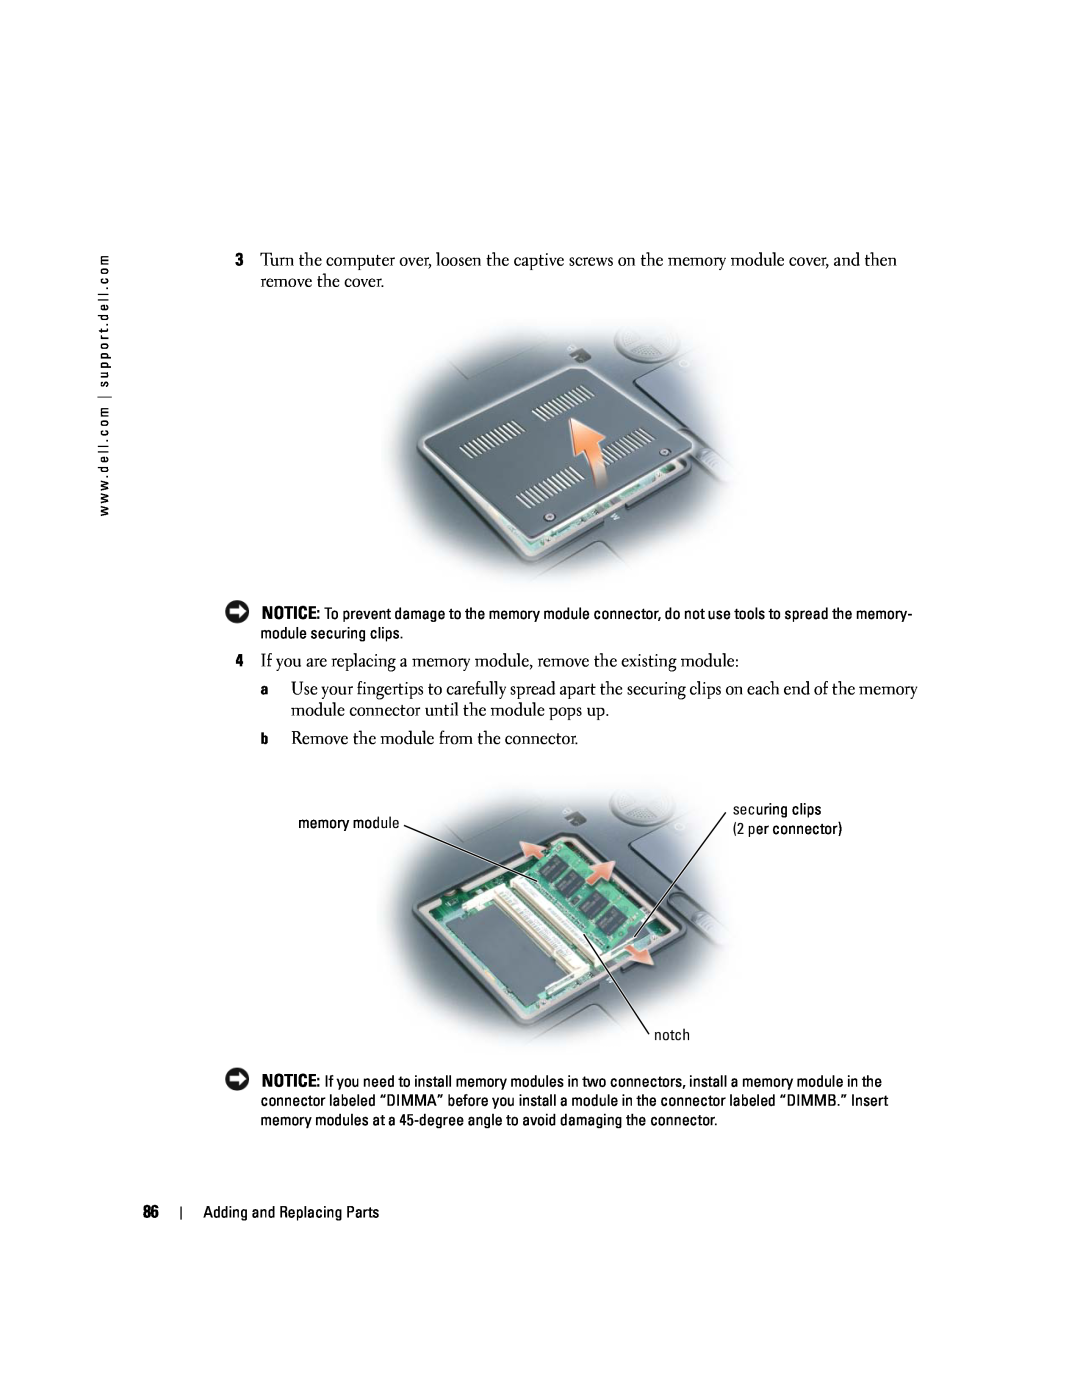 Dell 9300 owner manual If you are replacing a memory module, remove the existing module 